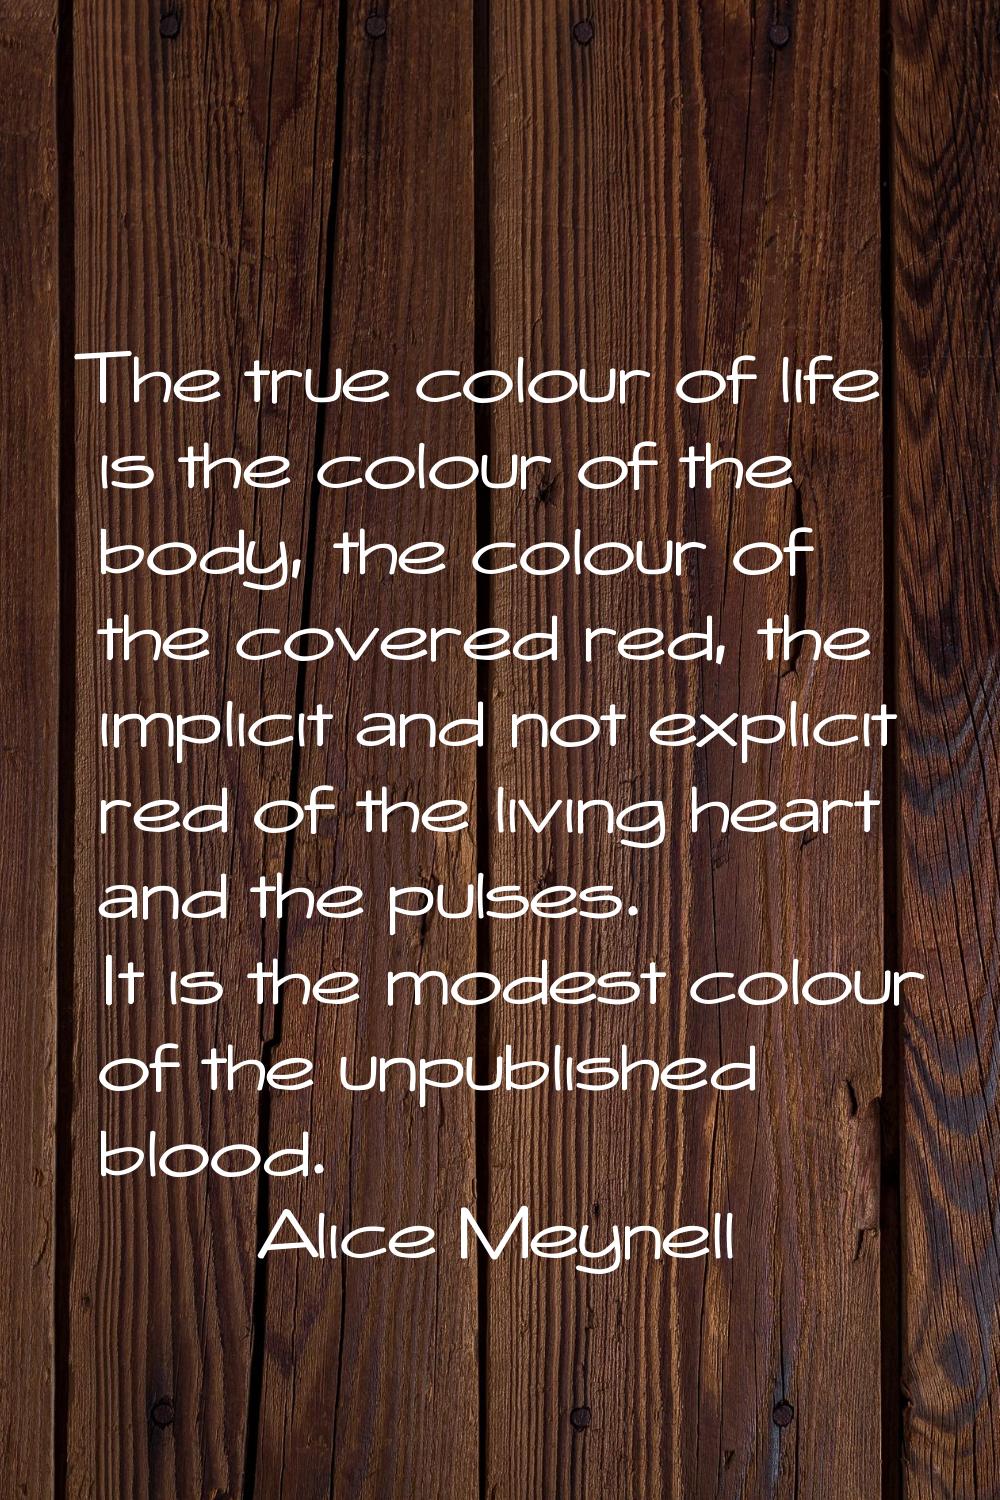 The true colour of life is the colour of the body, the colour of the covered red, the implicit and 